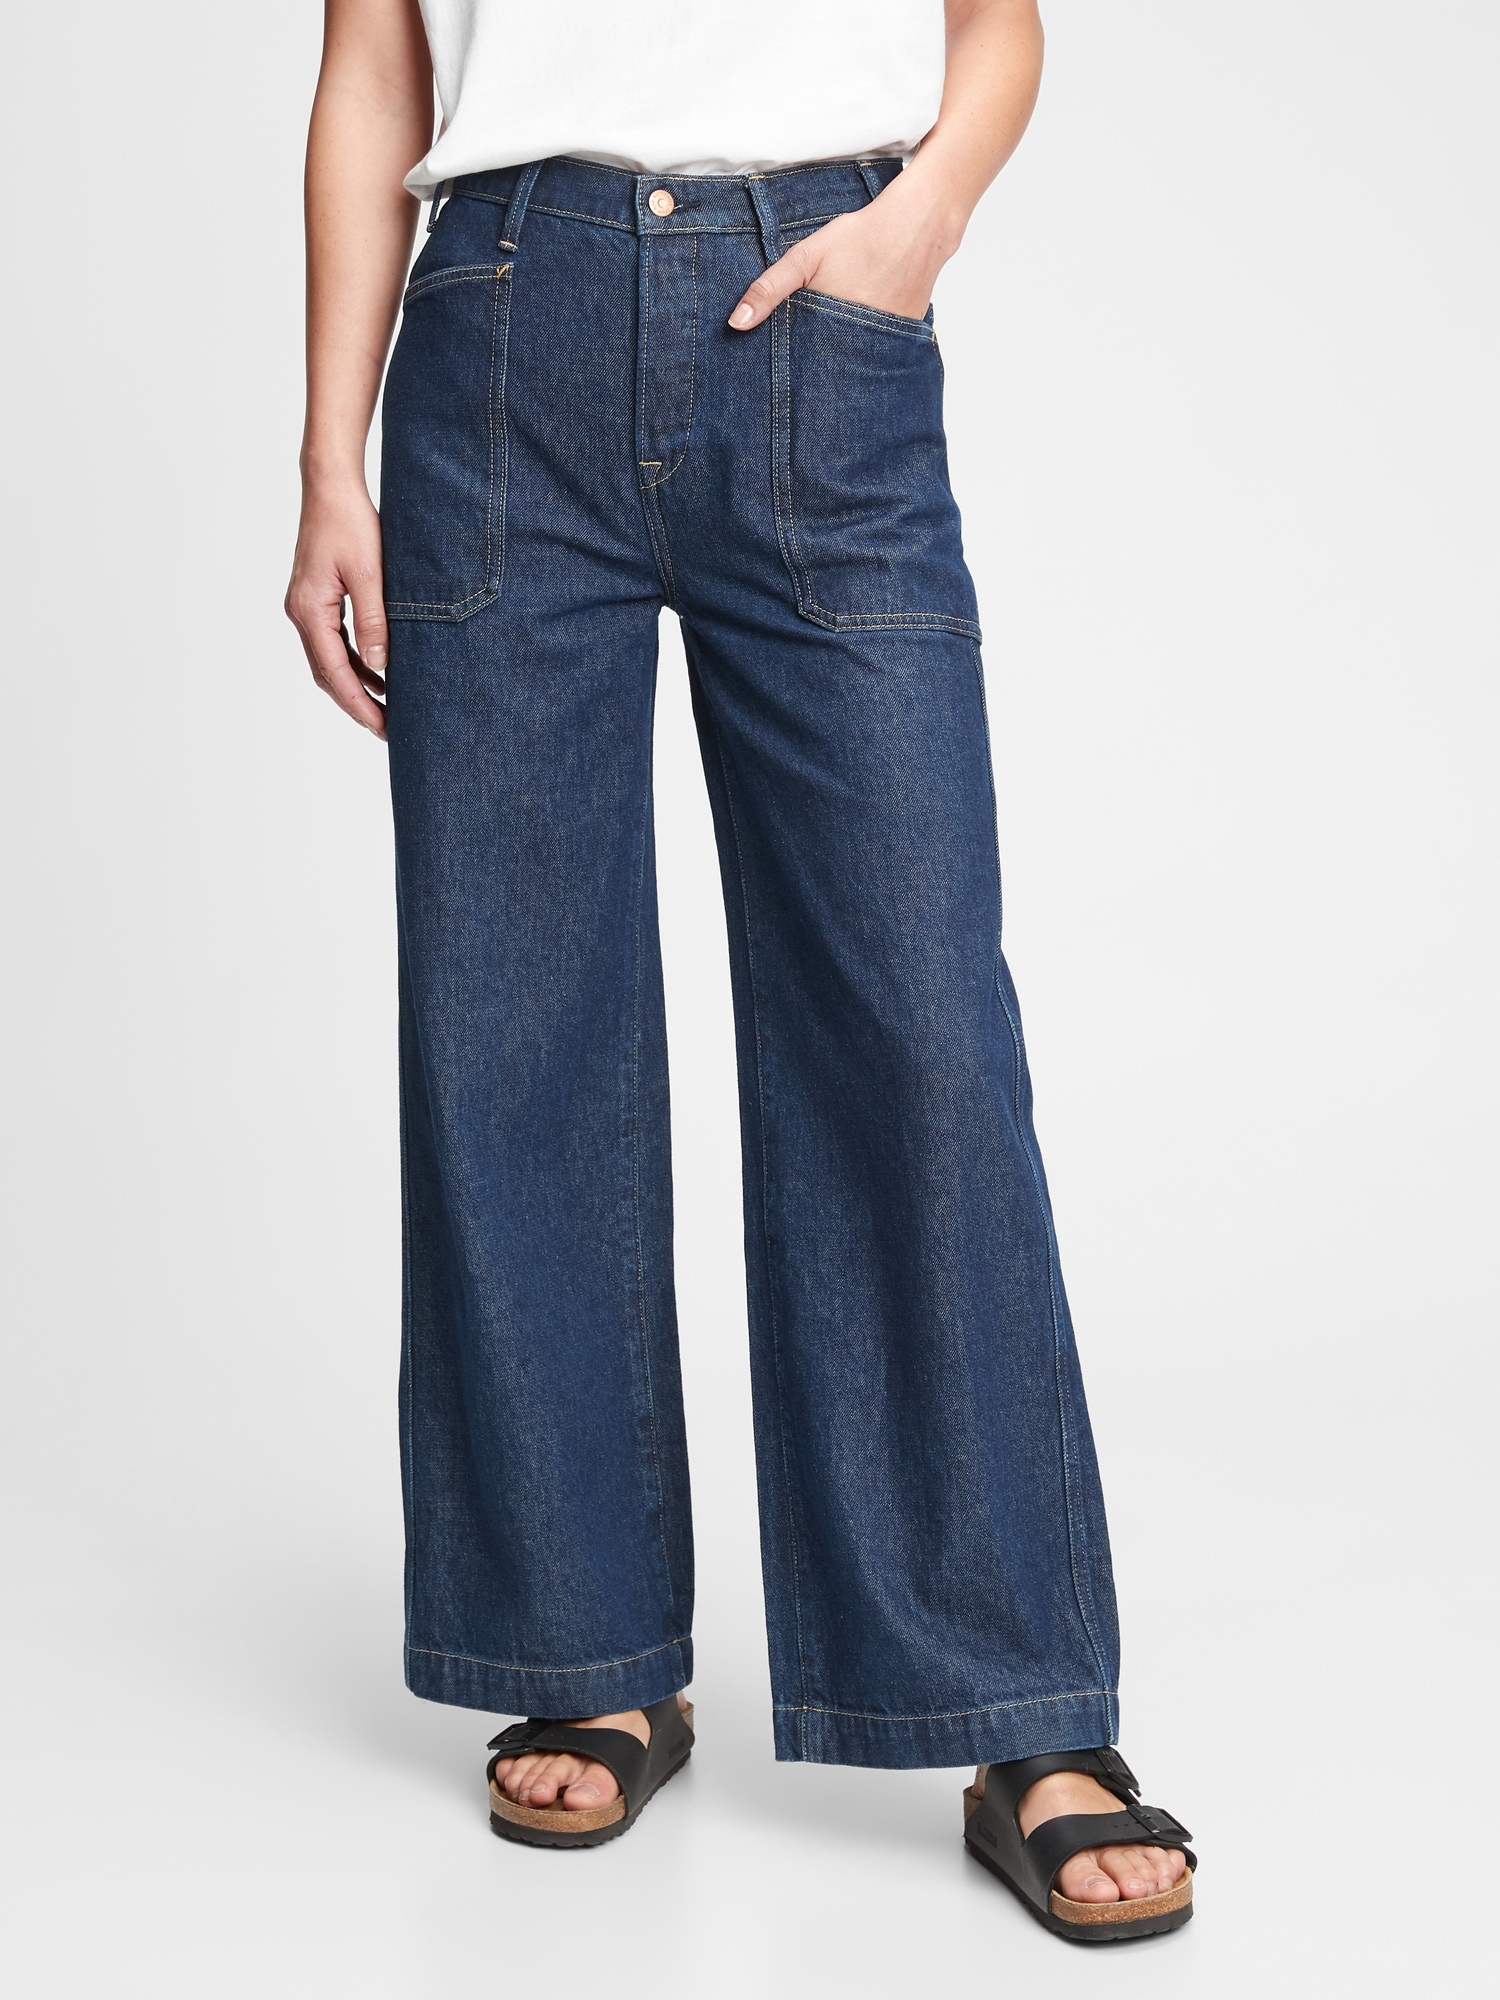 Gap & Jean ReDesign Sky High Wide Leg Trouser Jean With Washwell™ | Gap